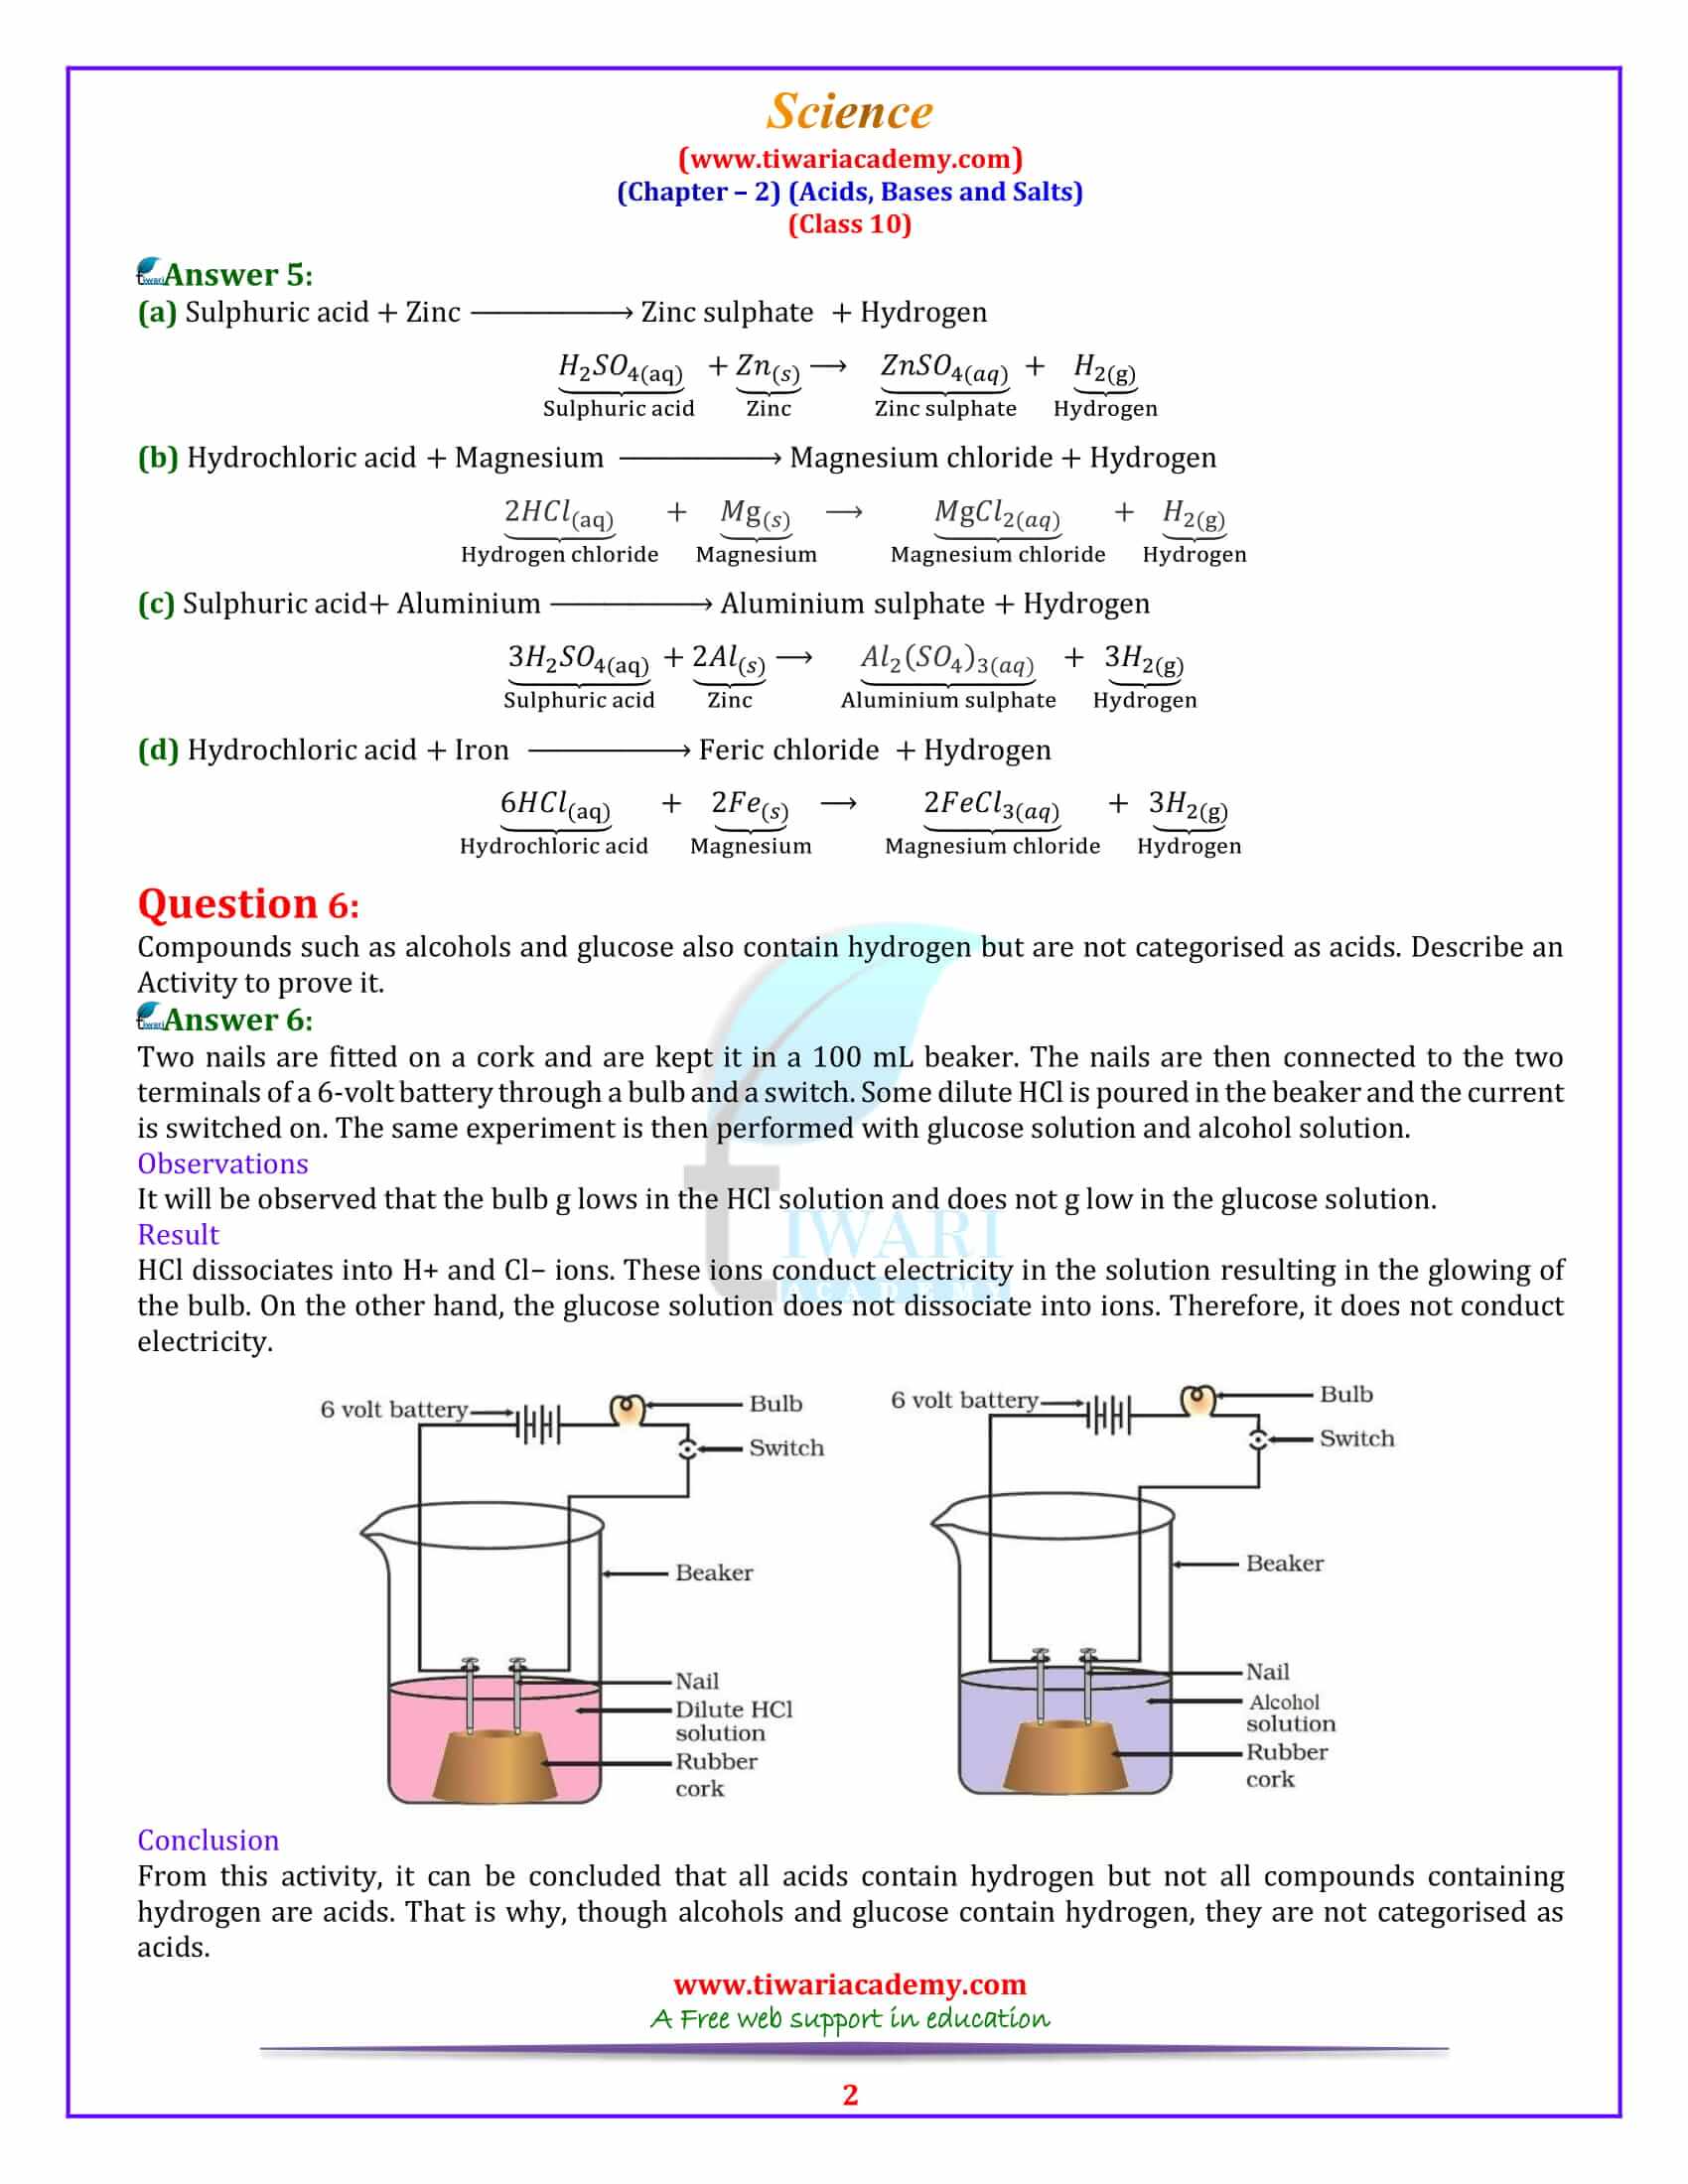 10 Science Chapter 2 Acids, Bases and Salts Exercises answers in pdf form